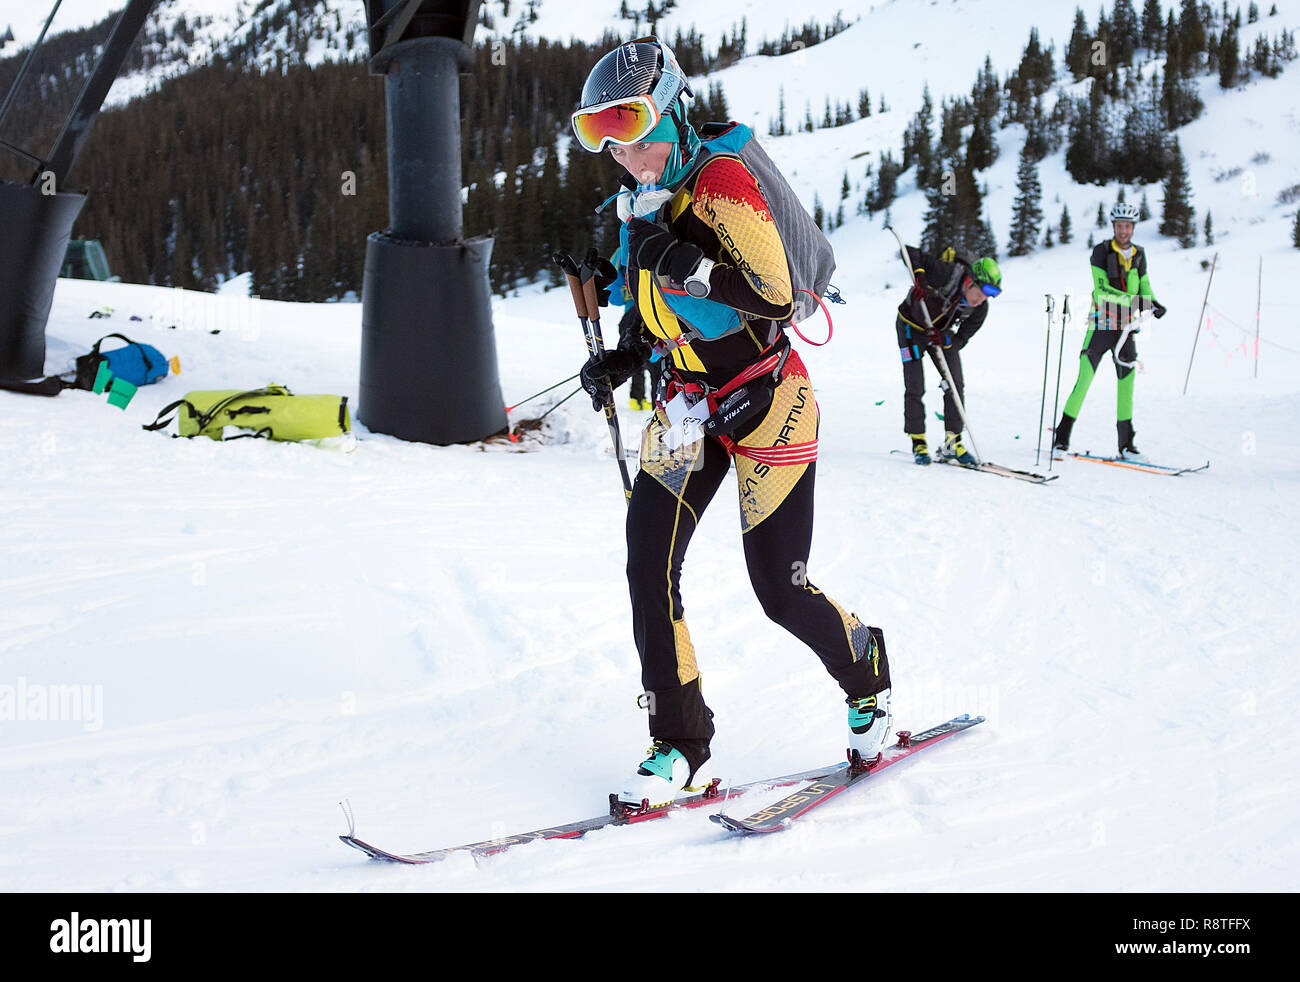 December 15, 2018: A La Sportiva ski mountaineering racer takes a quick  drink while leaving the transition area after applying climbing skins to  skis during the difficult United States Ski Mountaineering Association's